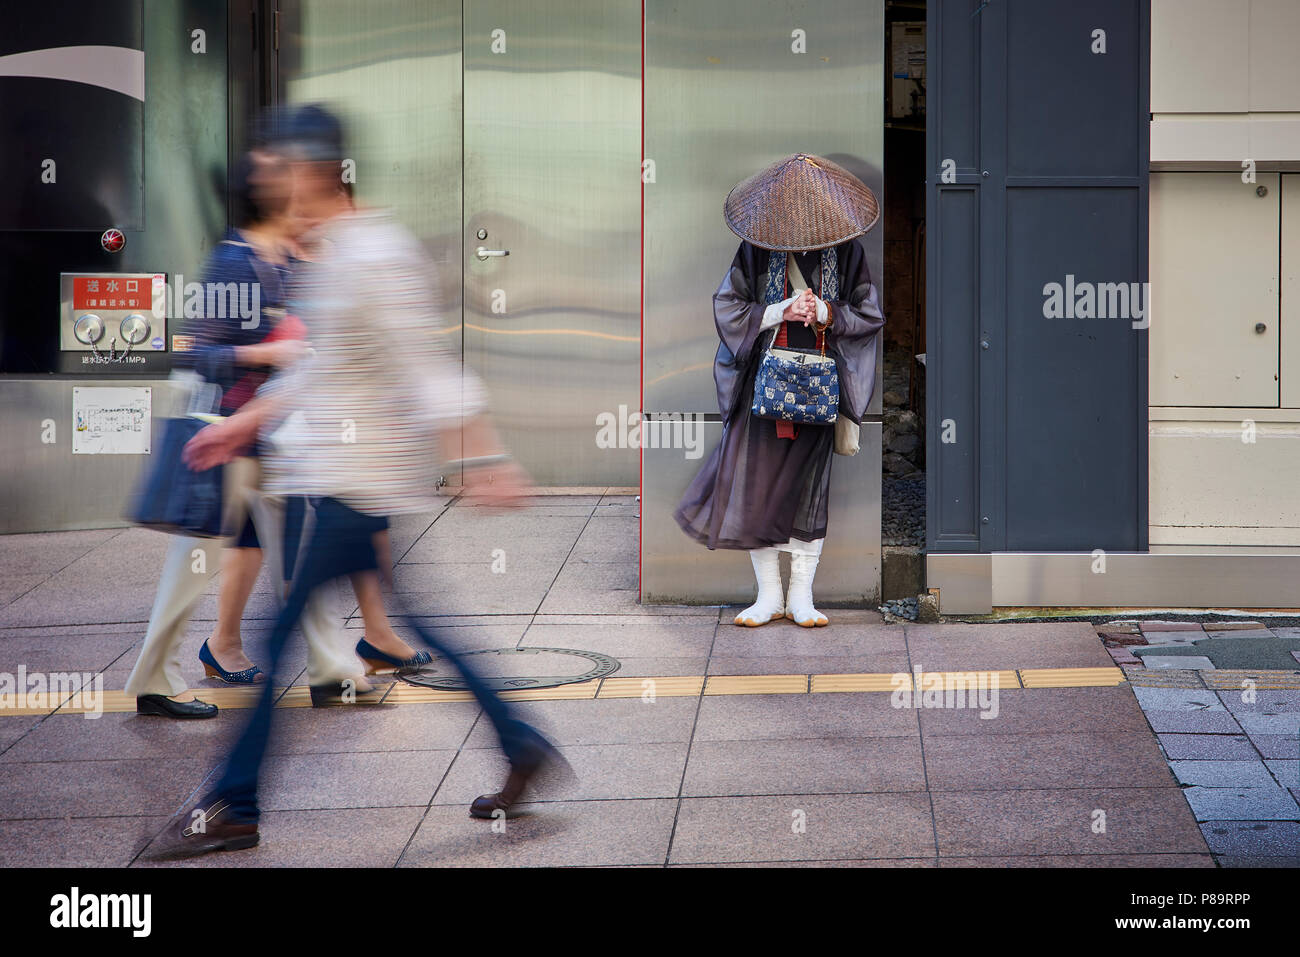 A Shintoist monk asking for alms in the street in Fukuoka, Japan, surrounded by motion blurred pedestrians. Stock Photo